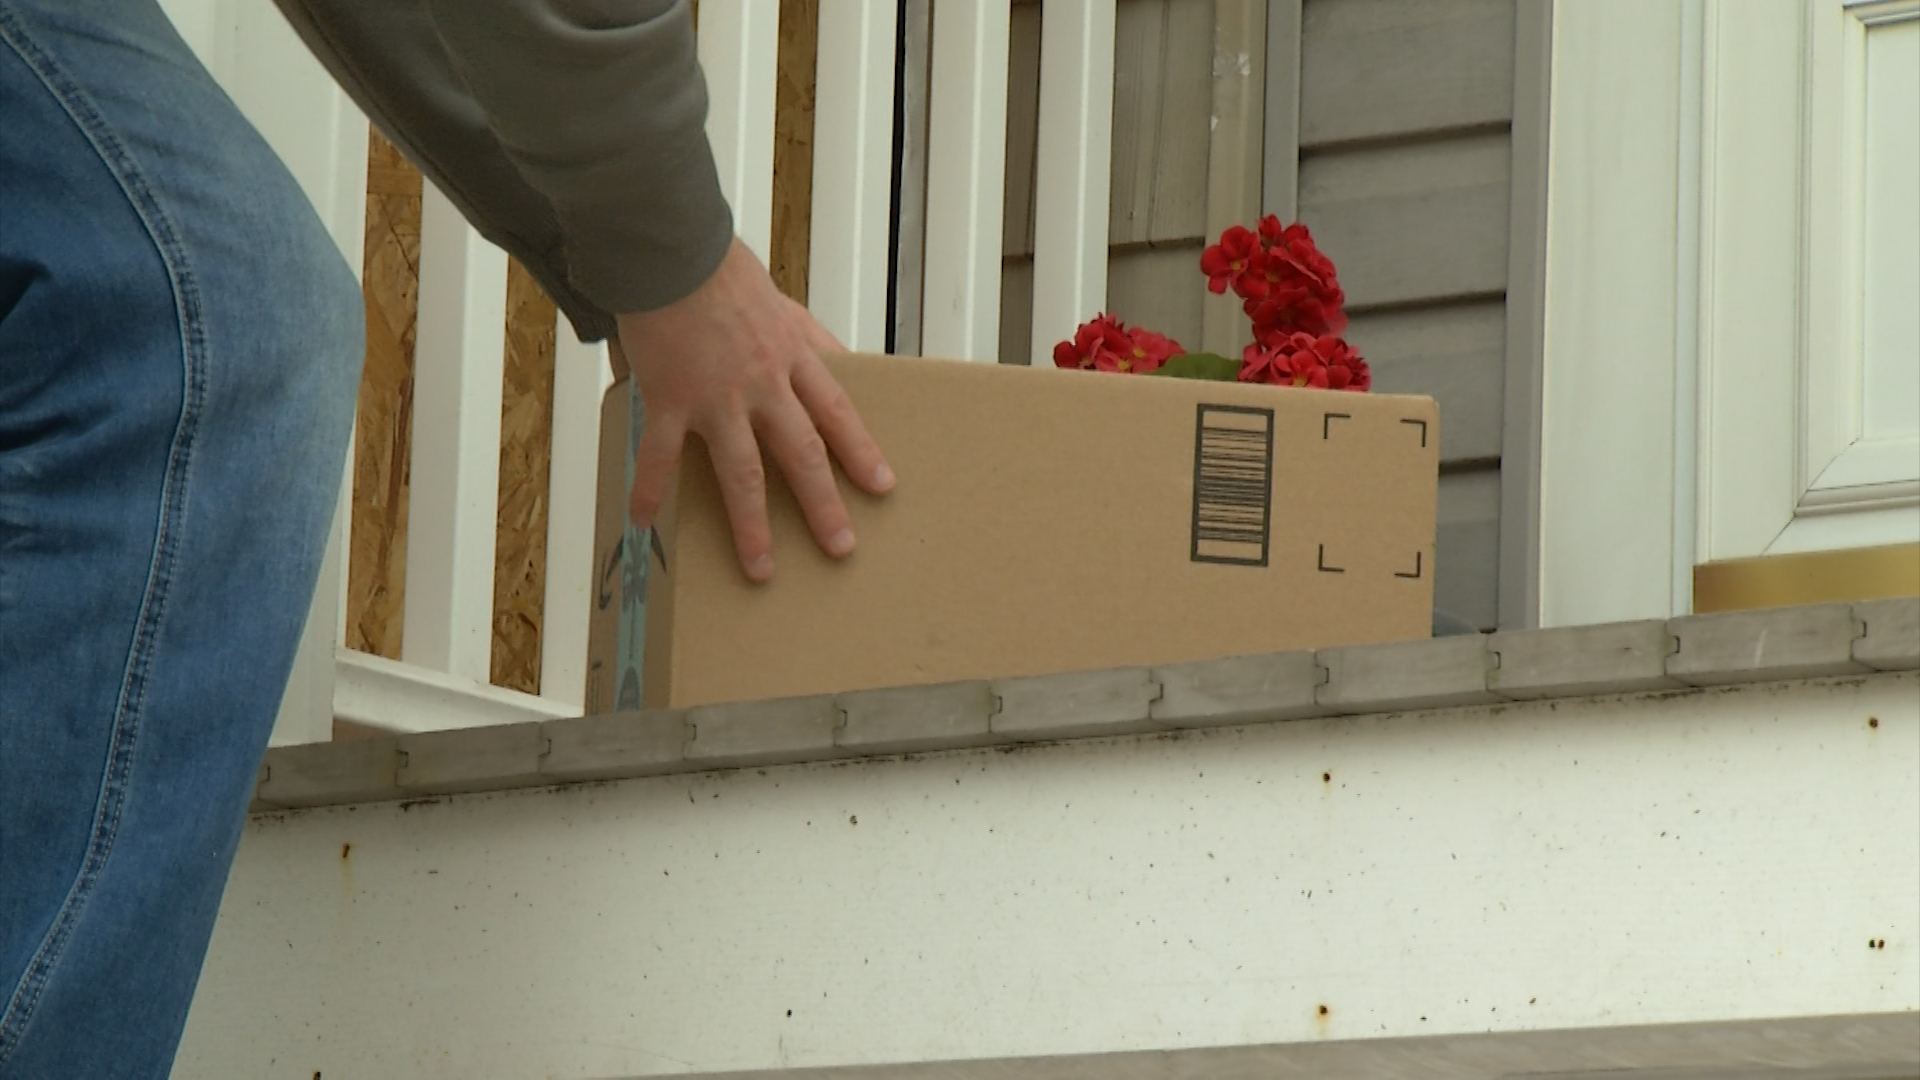 New law in New Jersey targets "porch pirates" 